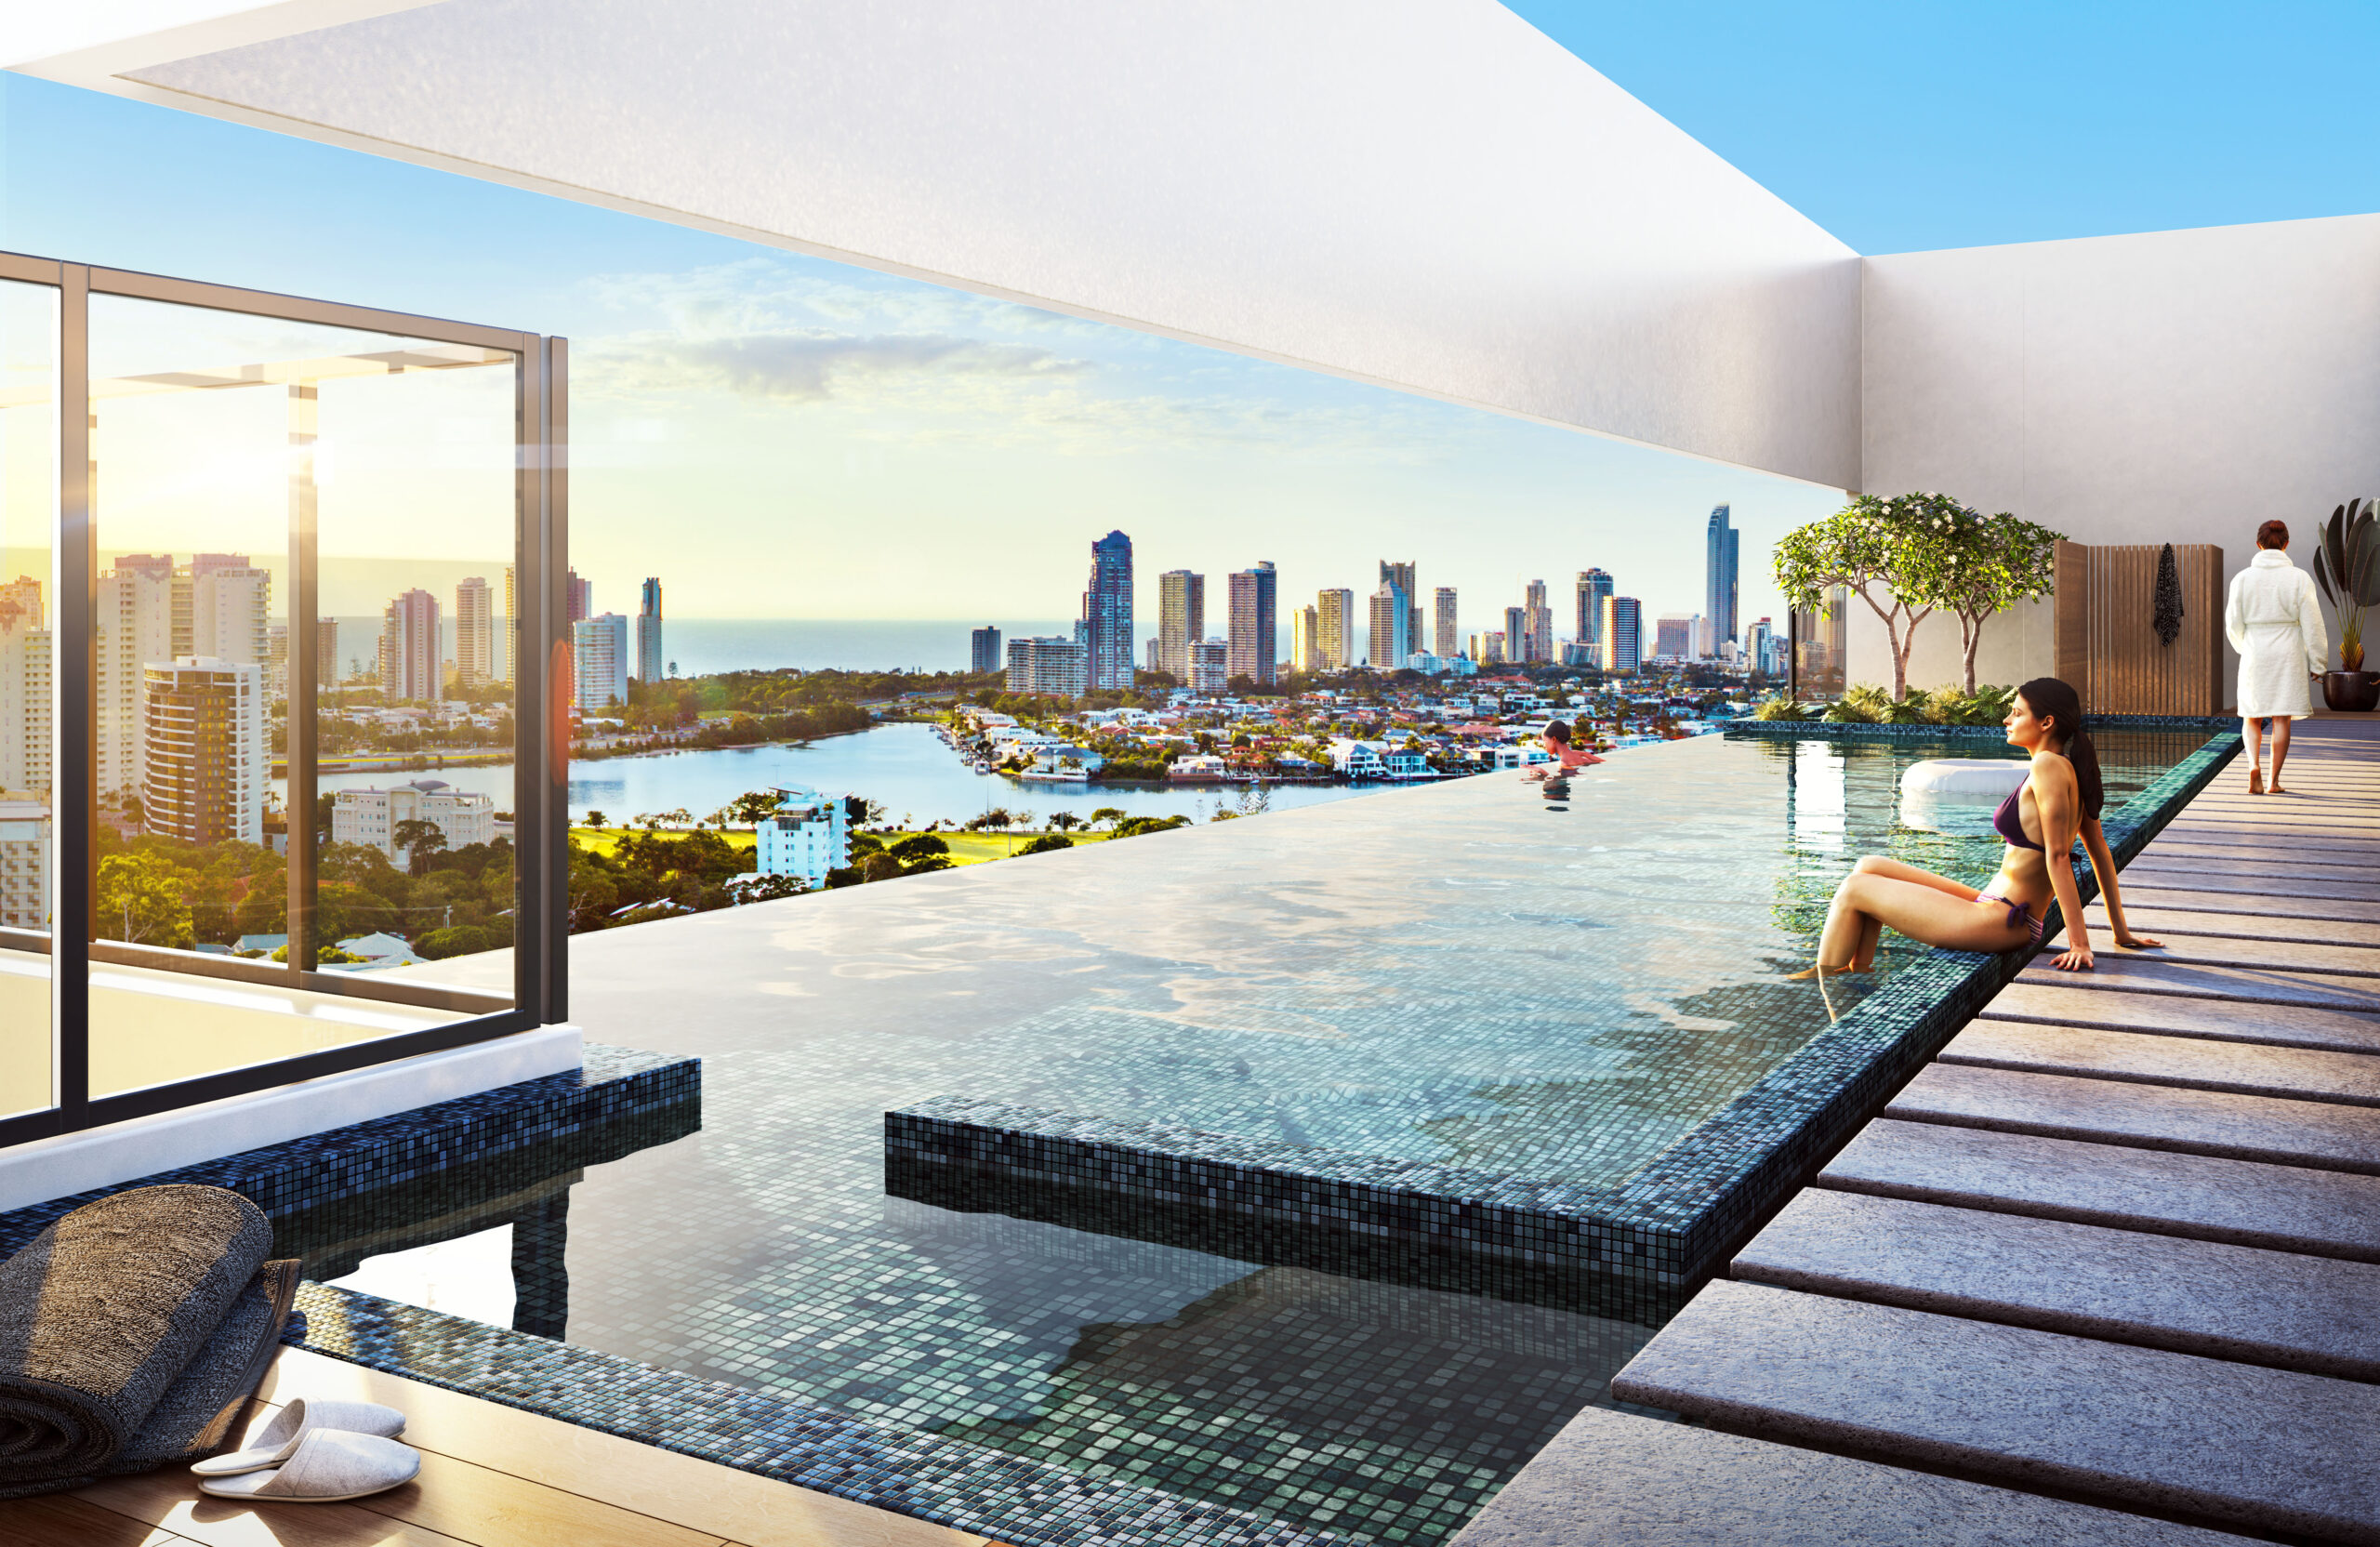 Rooftop pool area with stone stepping stone details alongside the pool and an infinity-style design offering breathtaking views of the Gold Coast skyline. The pool is framed by a white wall, leaving a gap at eye level for uninterrupted outward views.